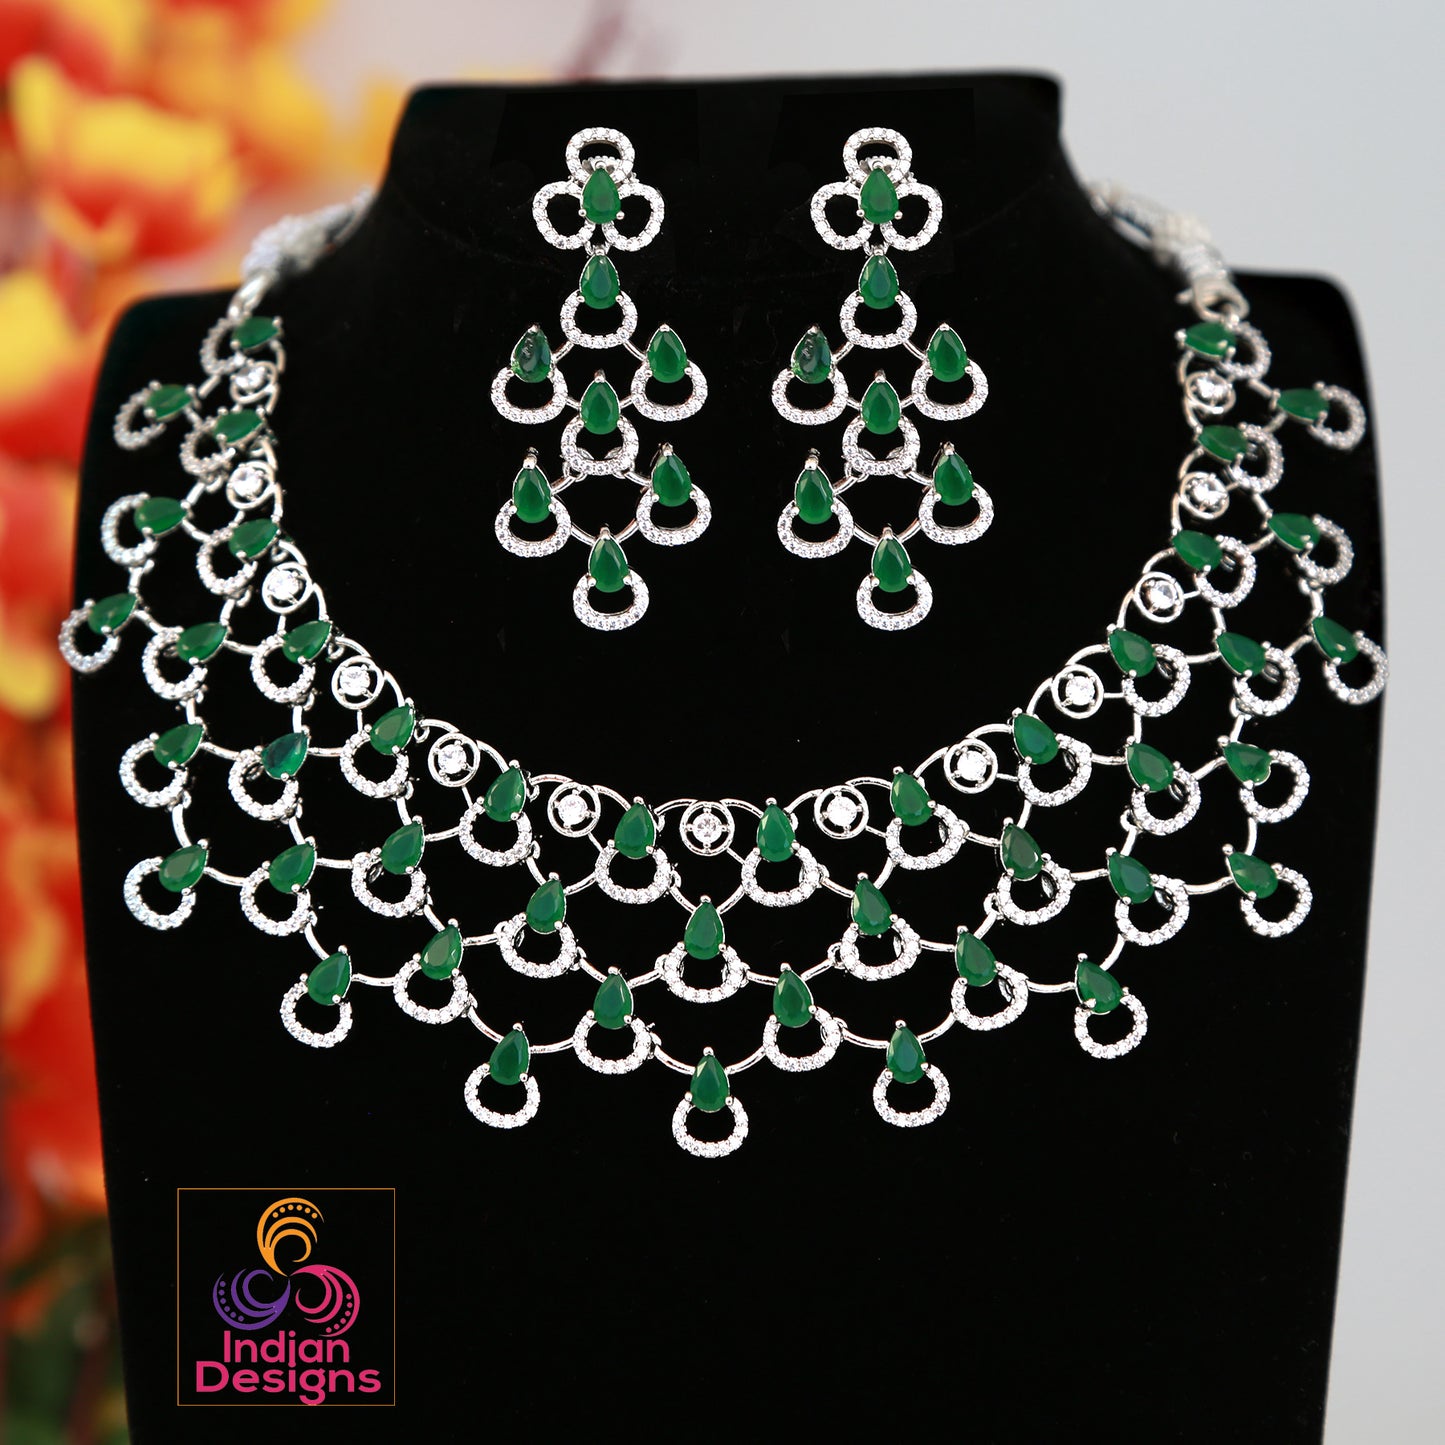 Silver American diamond choker Necklace|Tear Drop CZ Emerald stone necklace|Bollywood Indian,Pakistani Wedding  bridal necklace|Gift for her